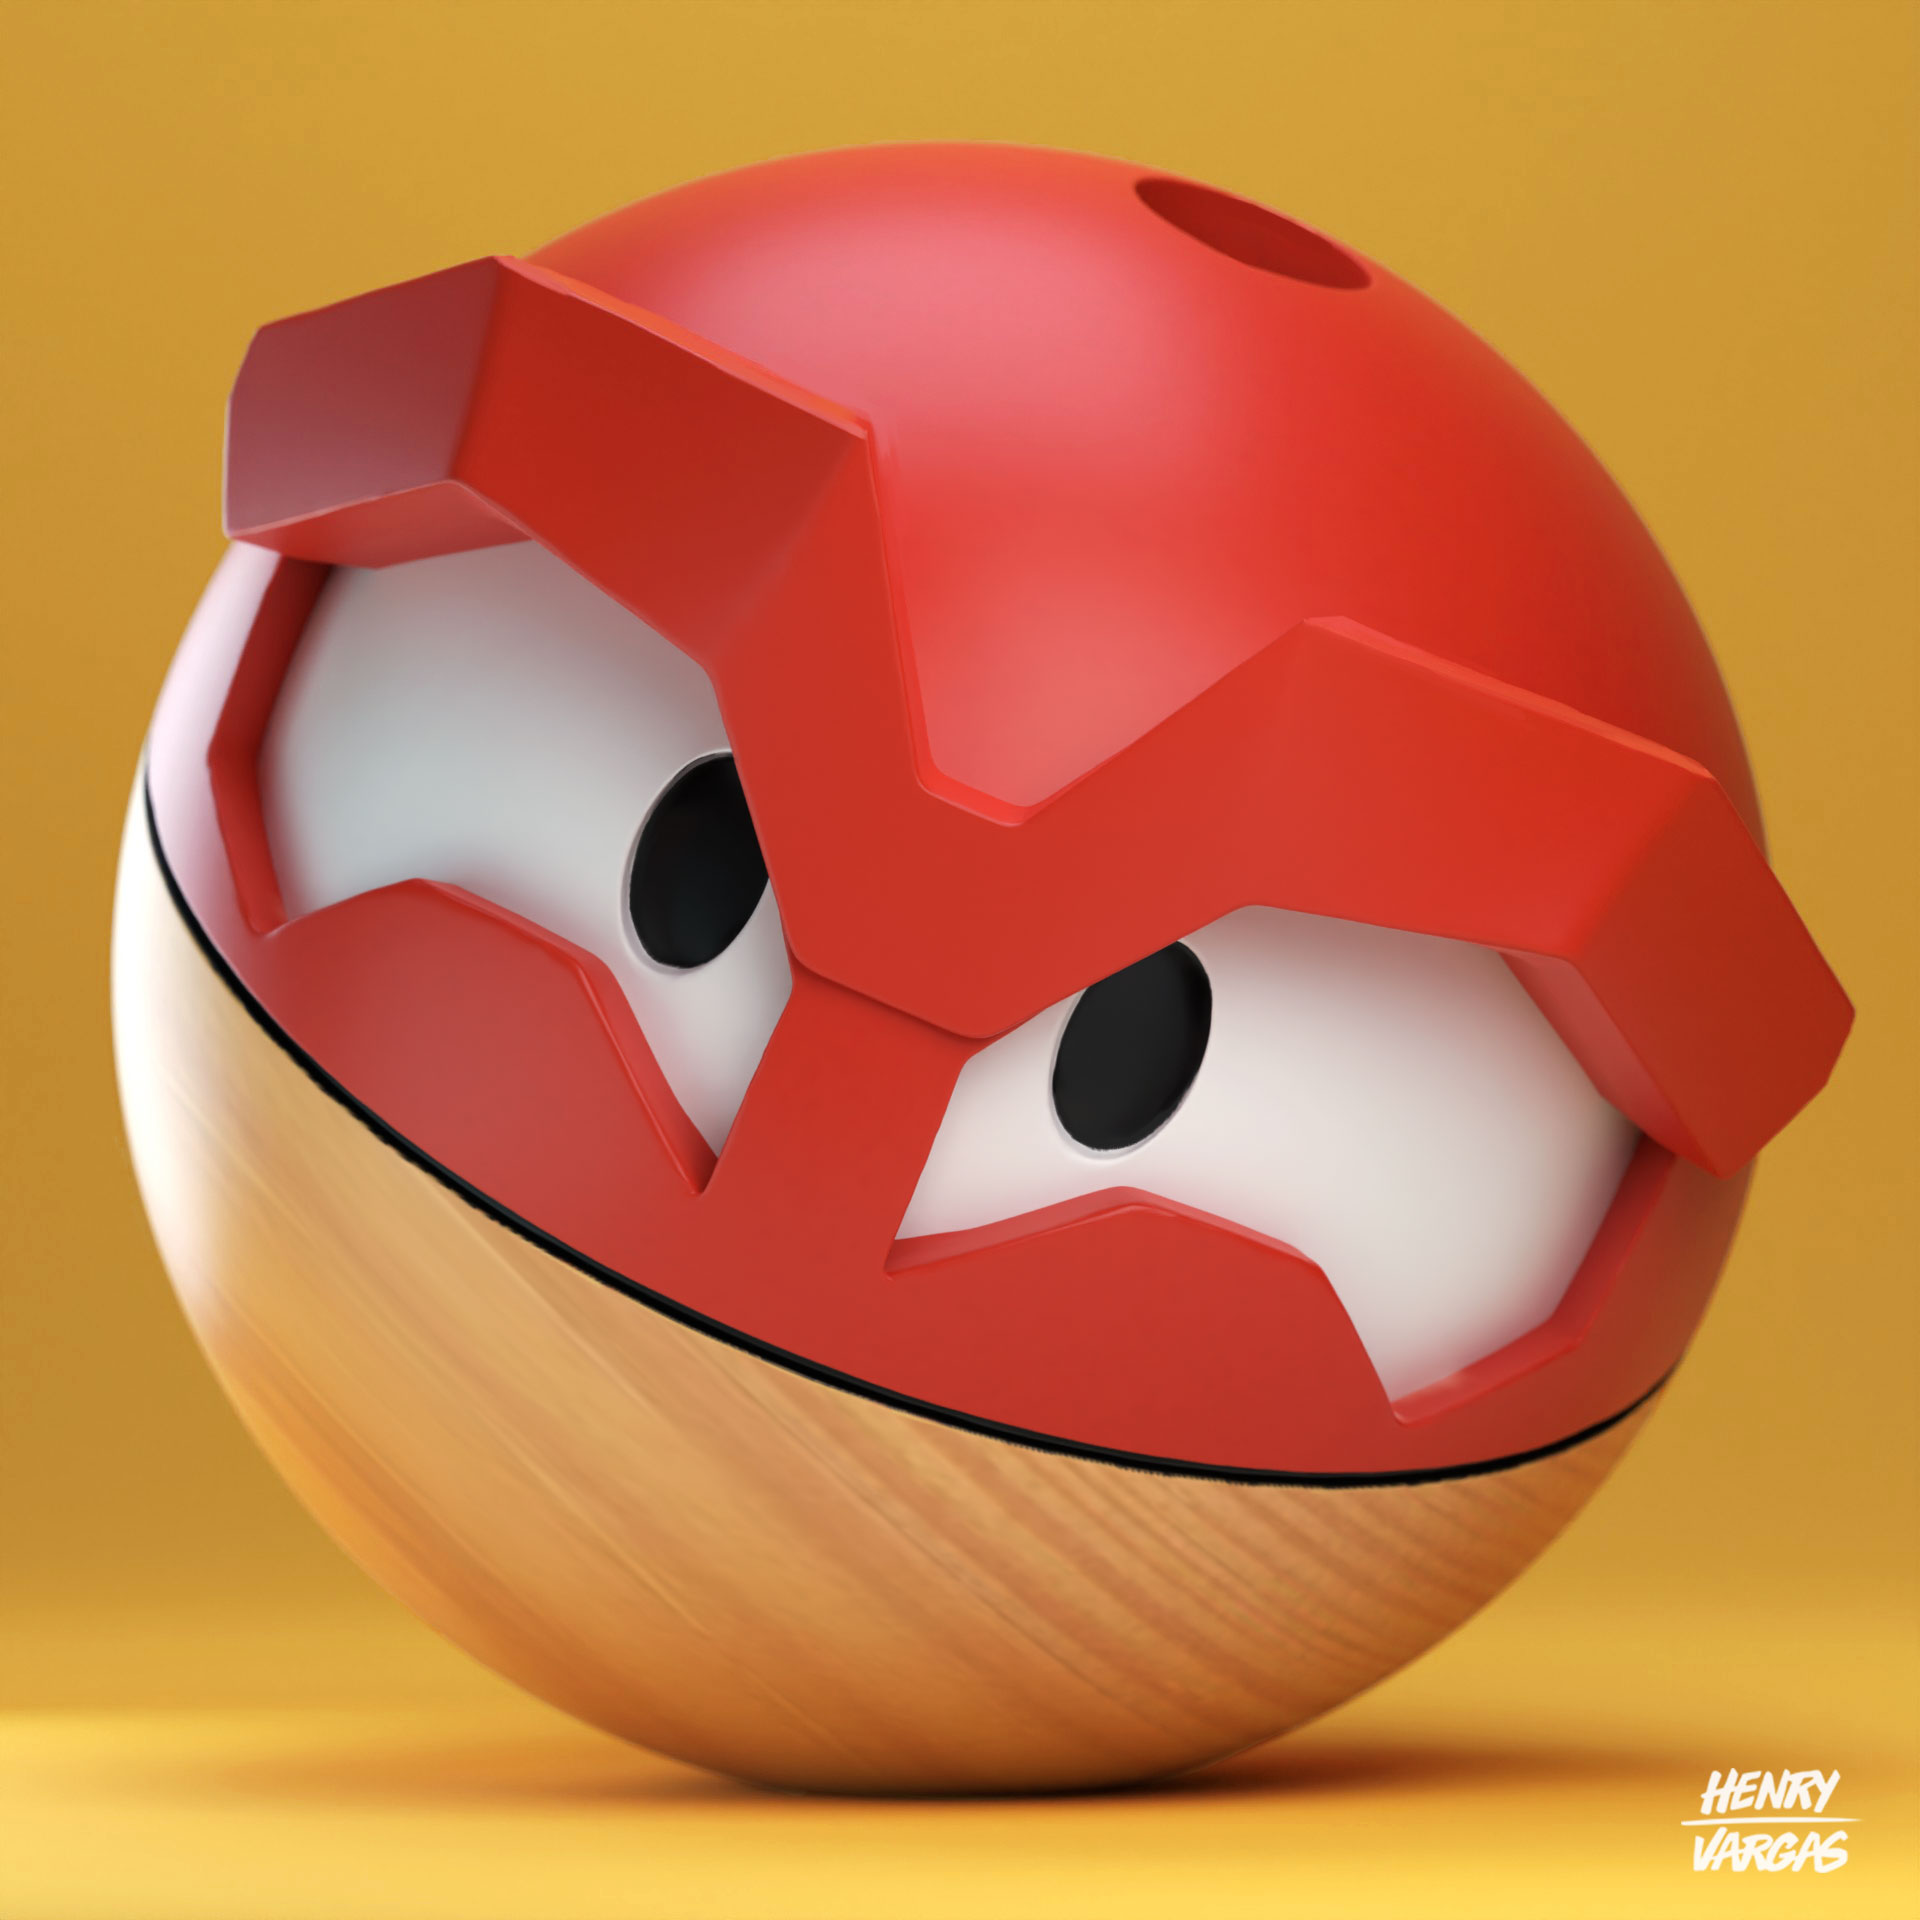 Voltorb Hd Wallpapers